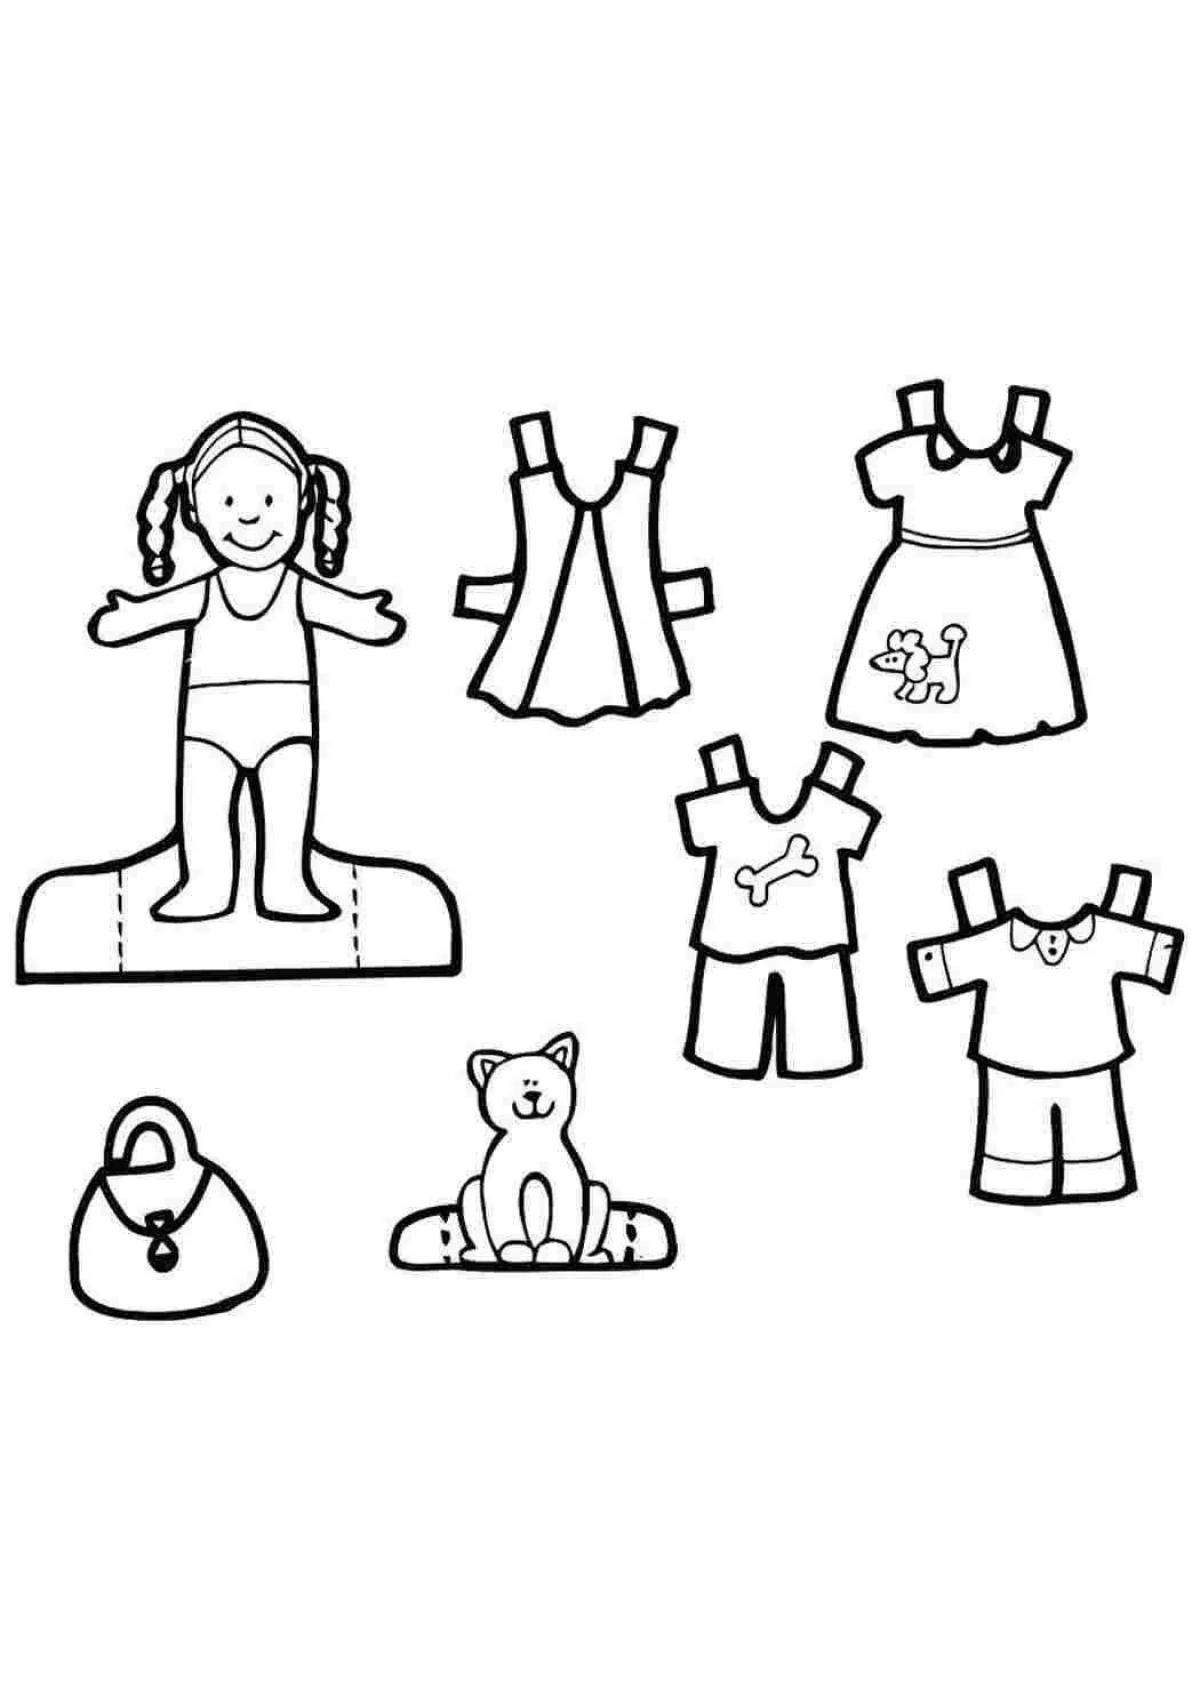 Radiant coloring page baby doll в платье